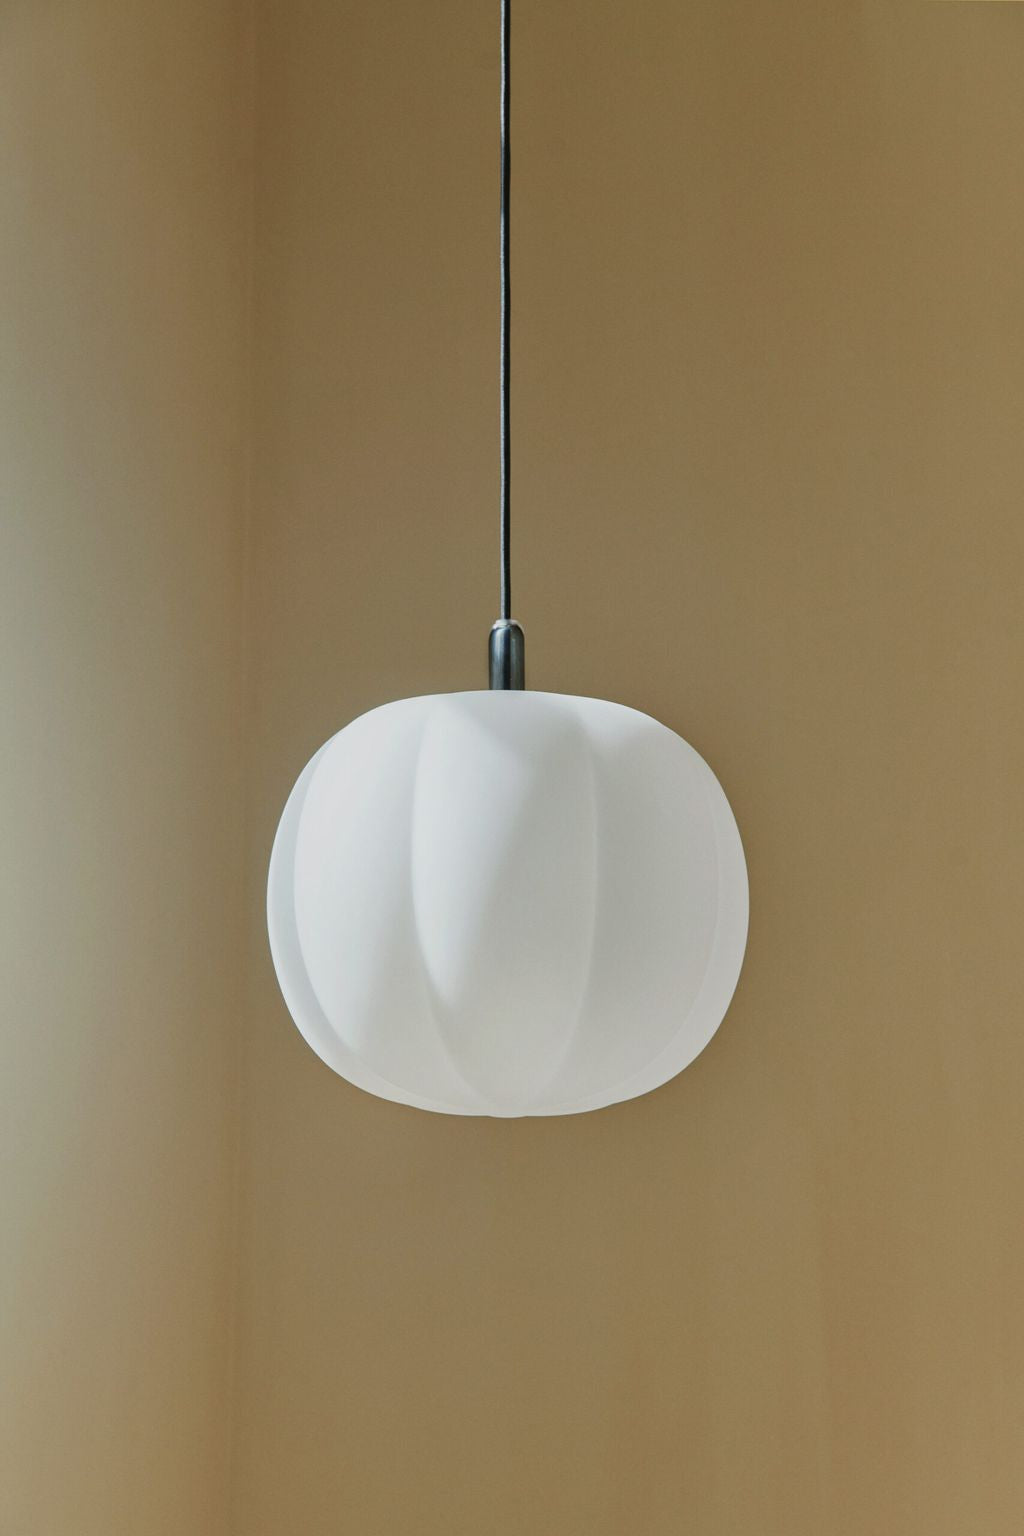 Made By Hand Pepo hanger lamp, Ø 30